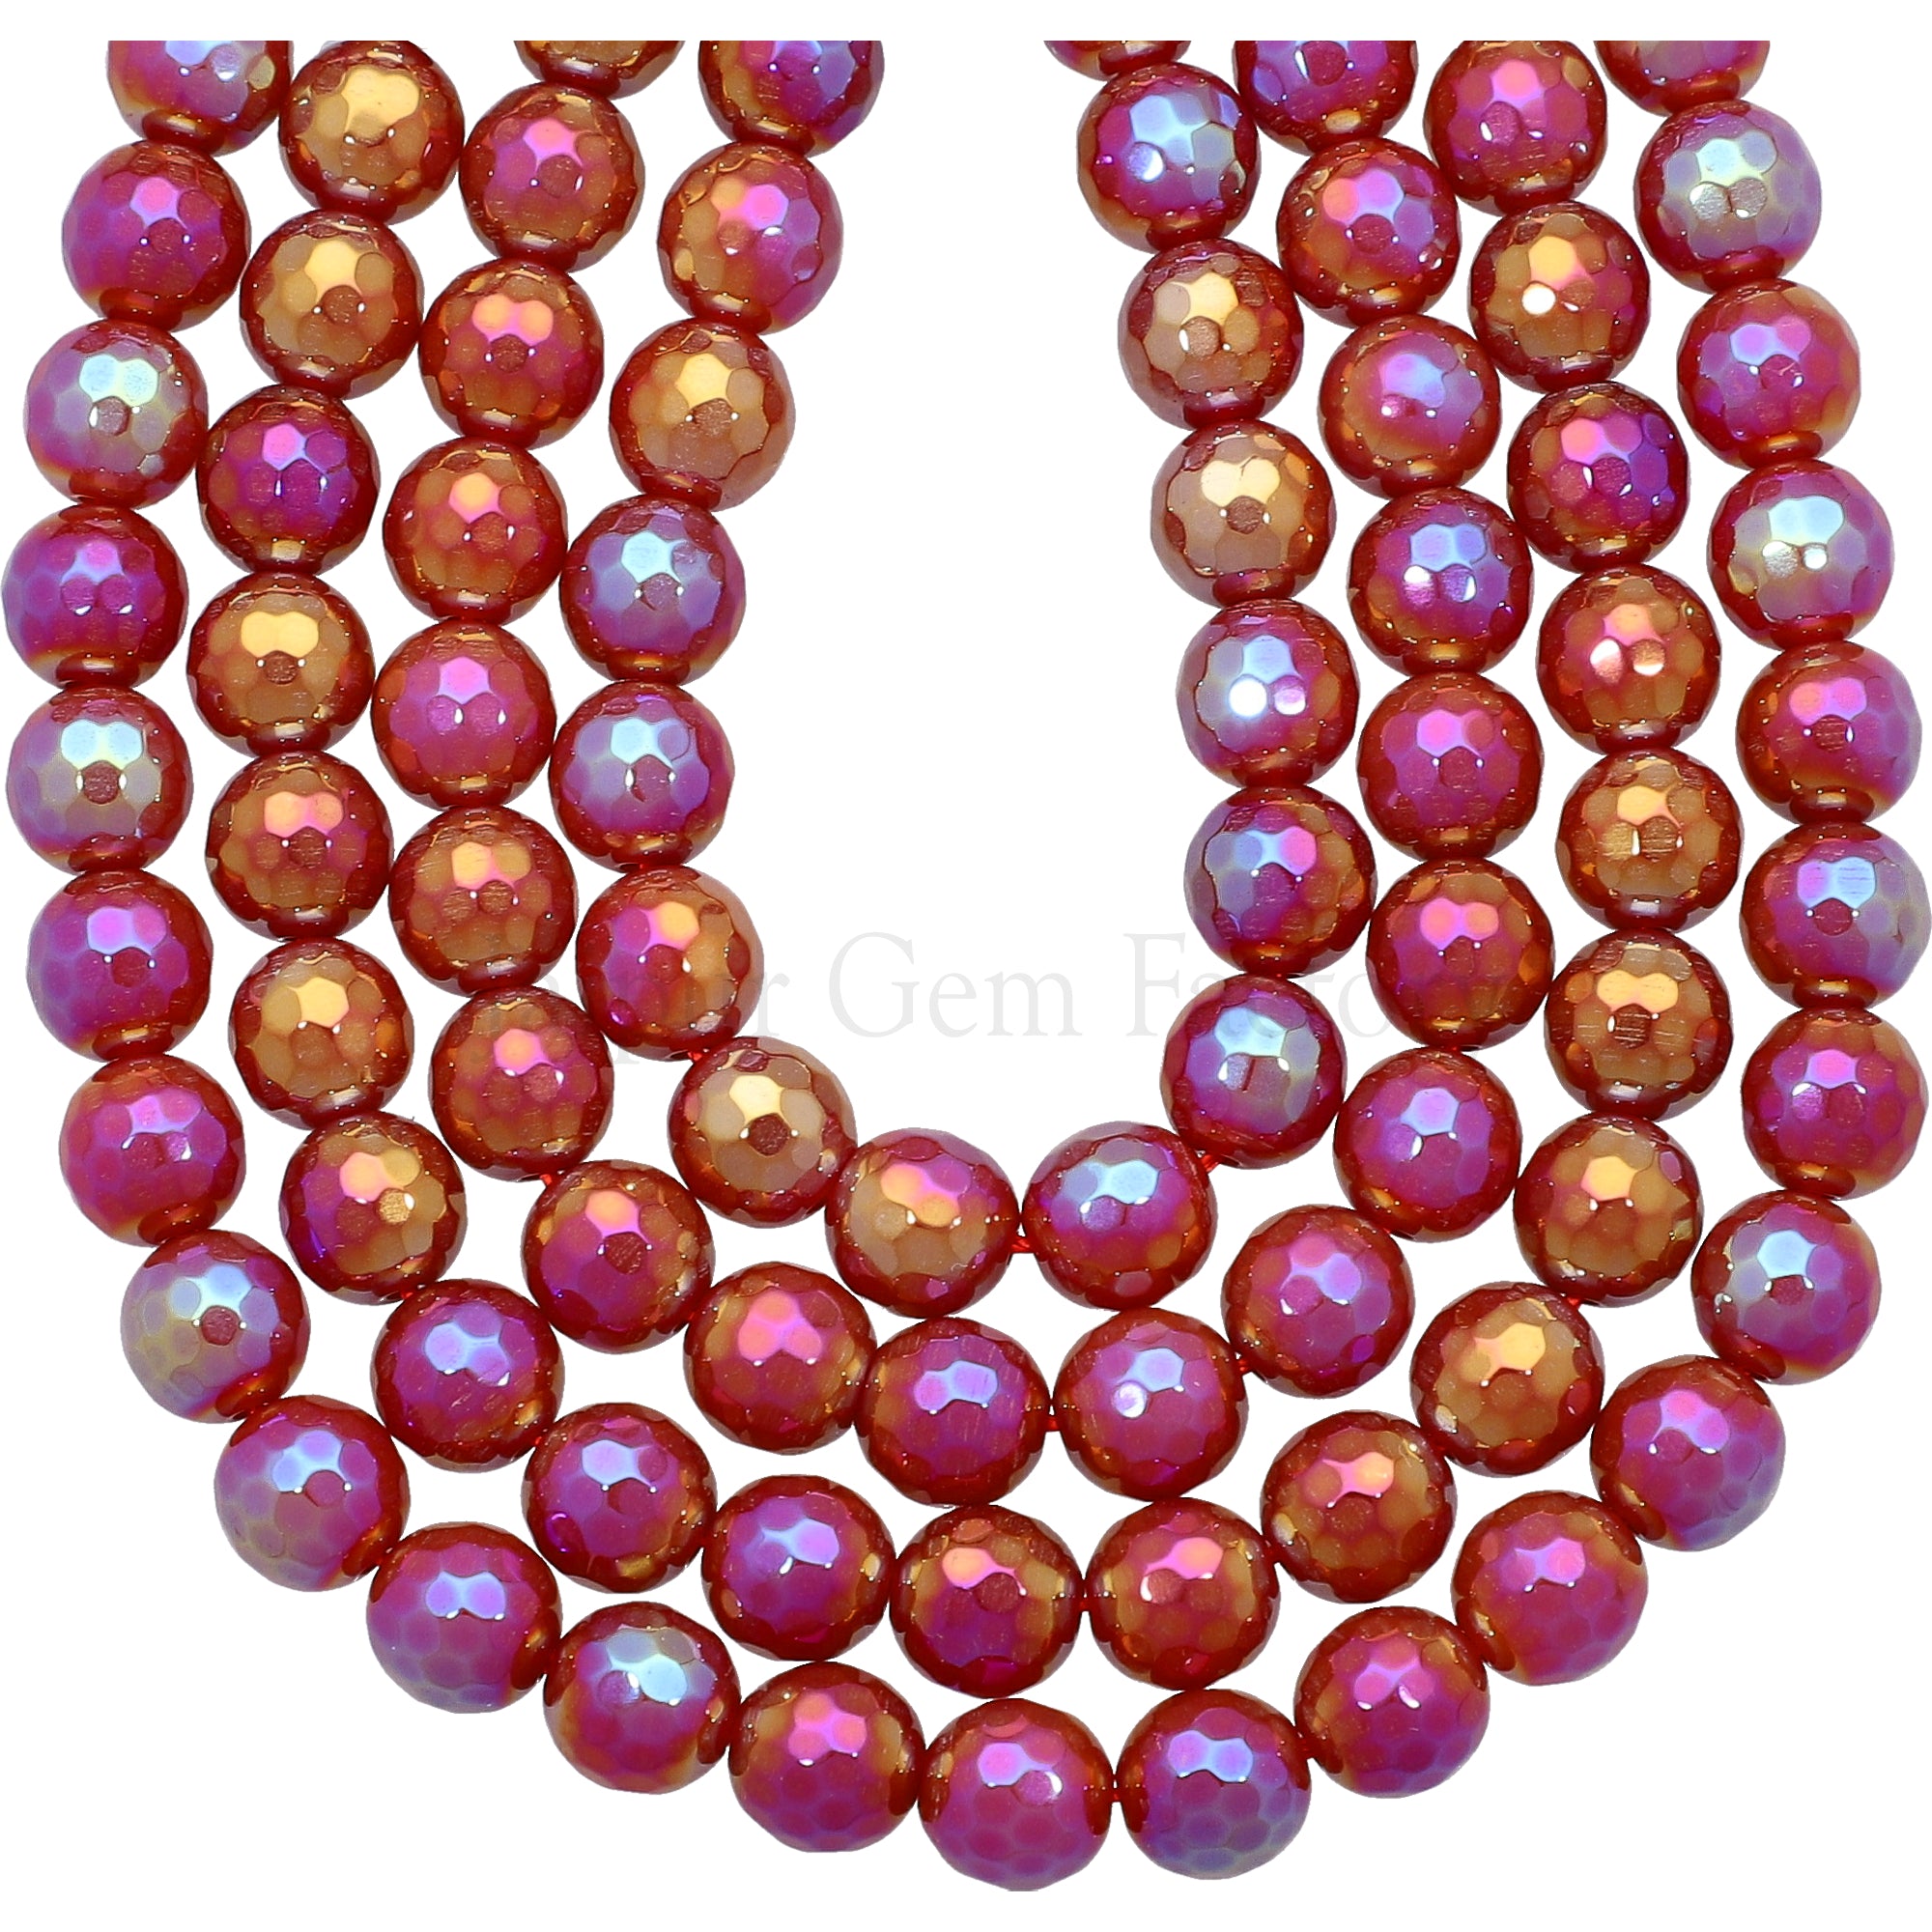 8 MM Mystic Gold Red Agate Faceted Round Beads 15 Inches Strand